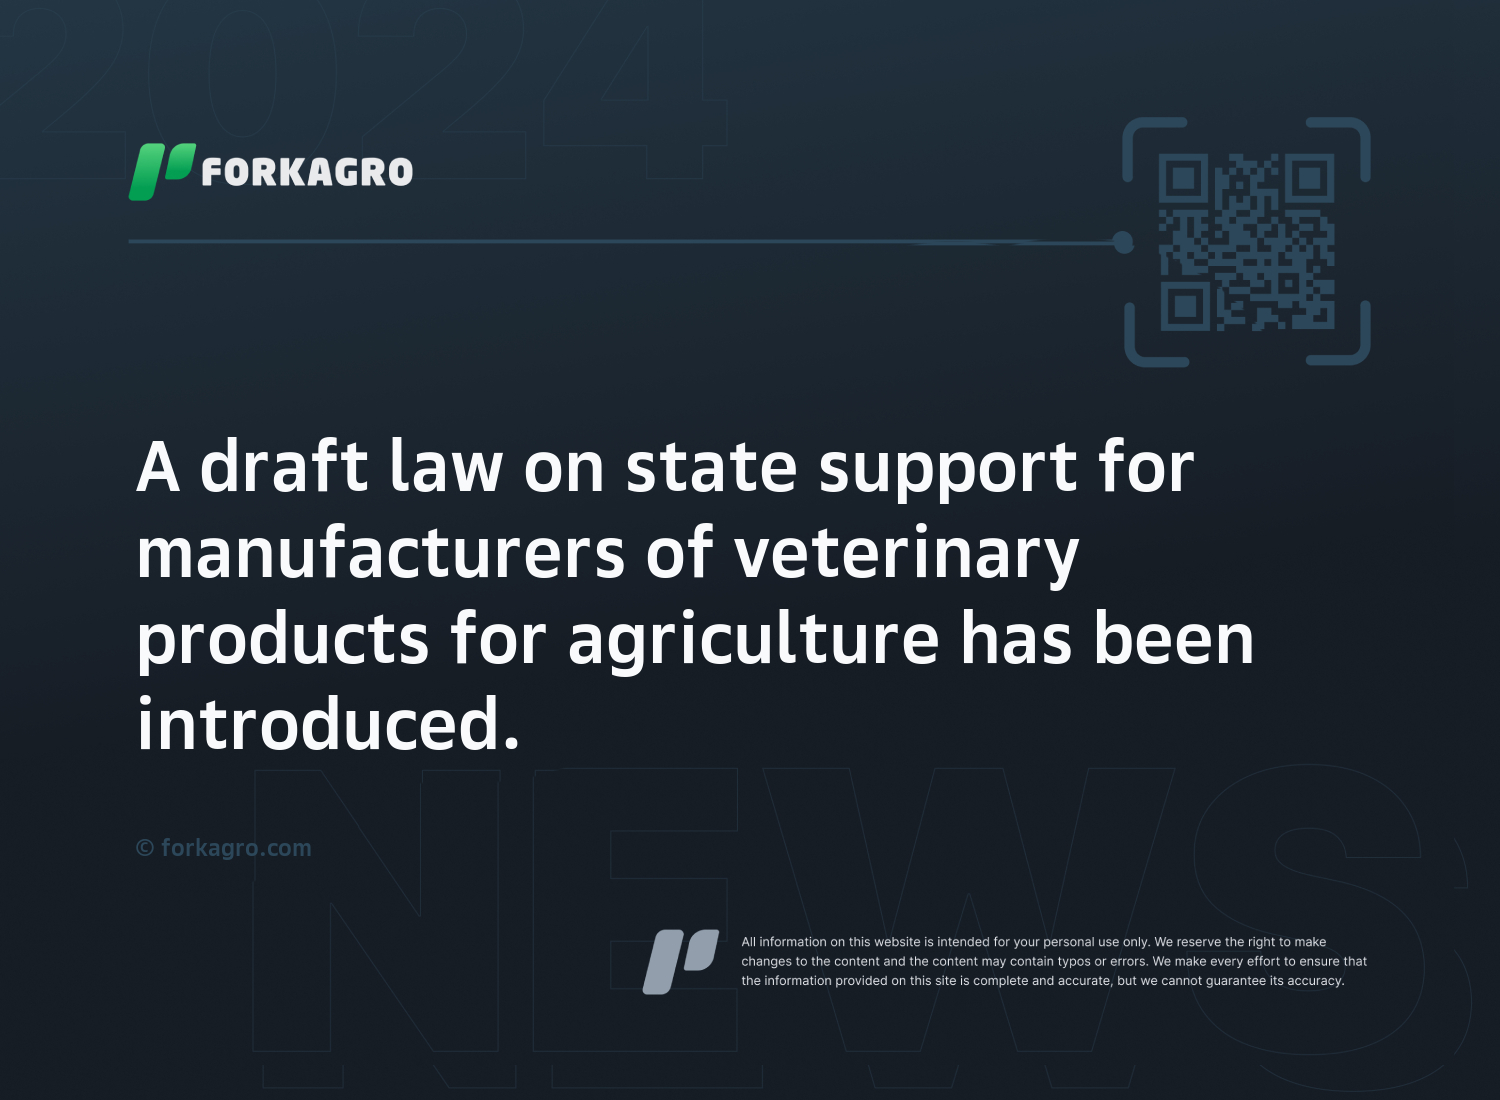 A draft law on state support for manufacturers of veterinary products for agriculture has been introduced.